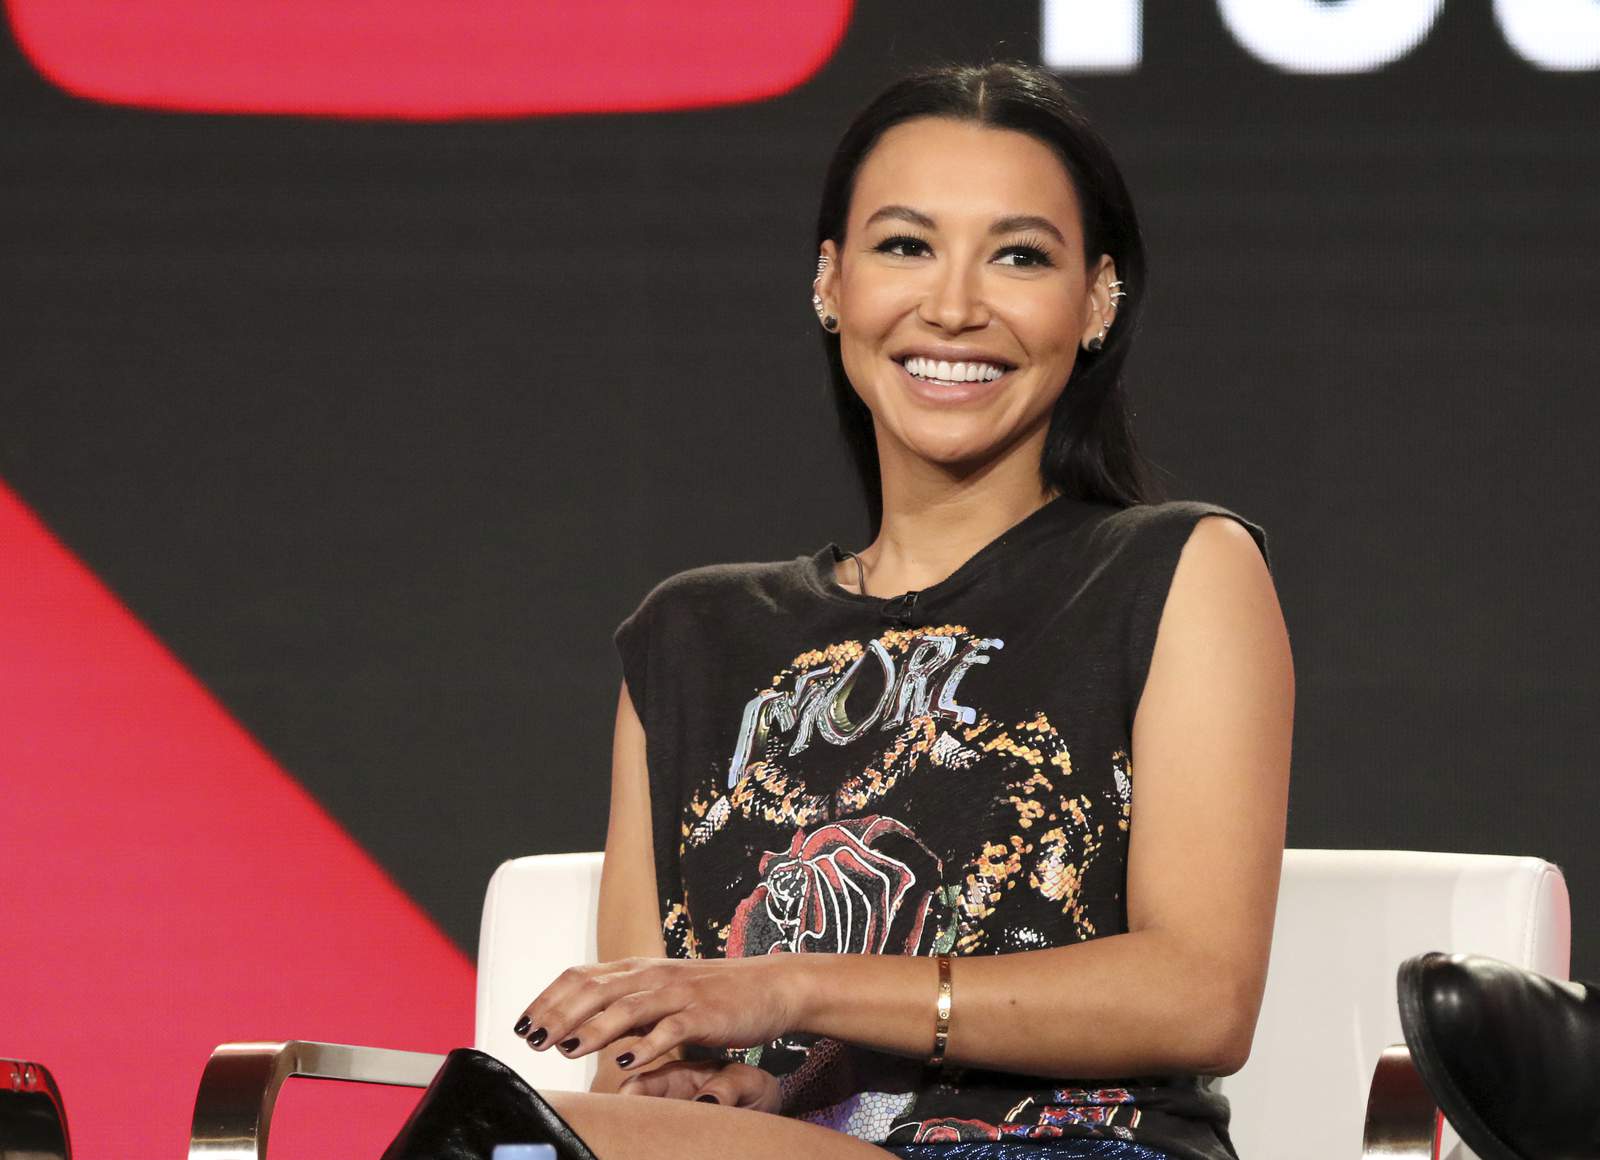 Wrongful death lawsuit filed over Naya Rivera's drowning